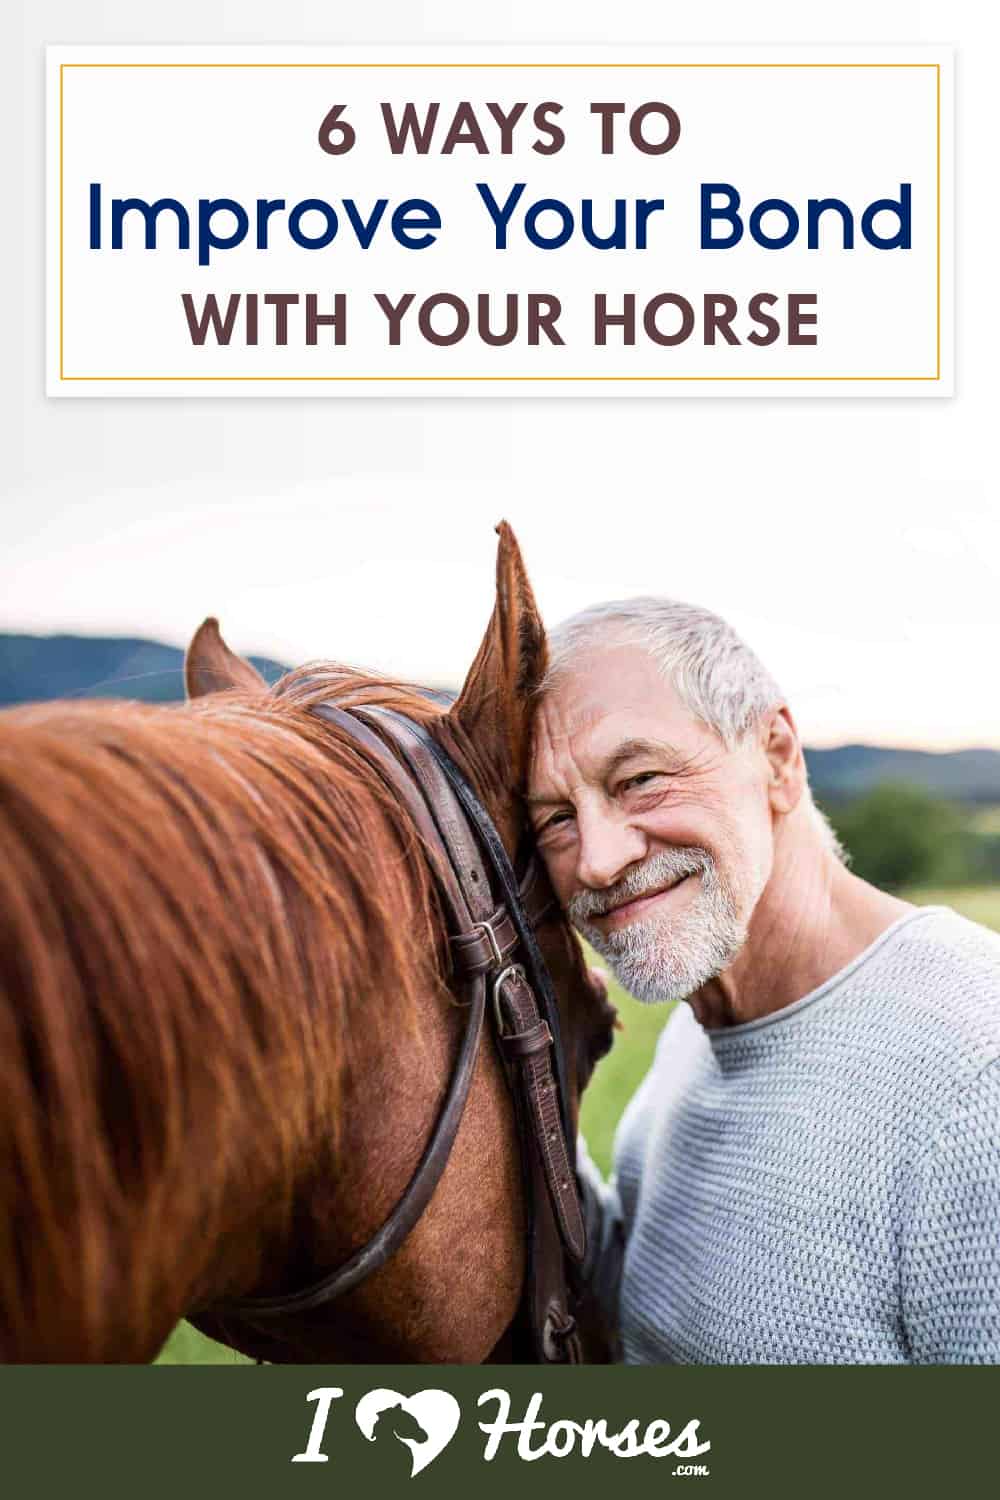 6 Ways To Improve Your Bond With Your Horse-02-01